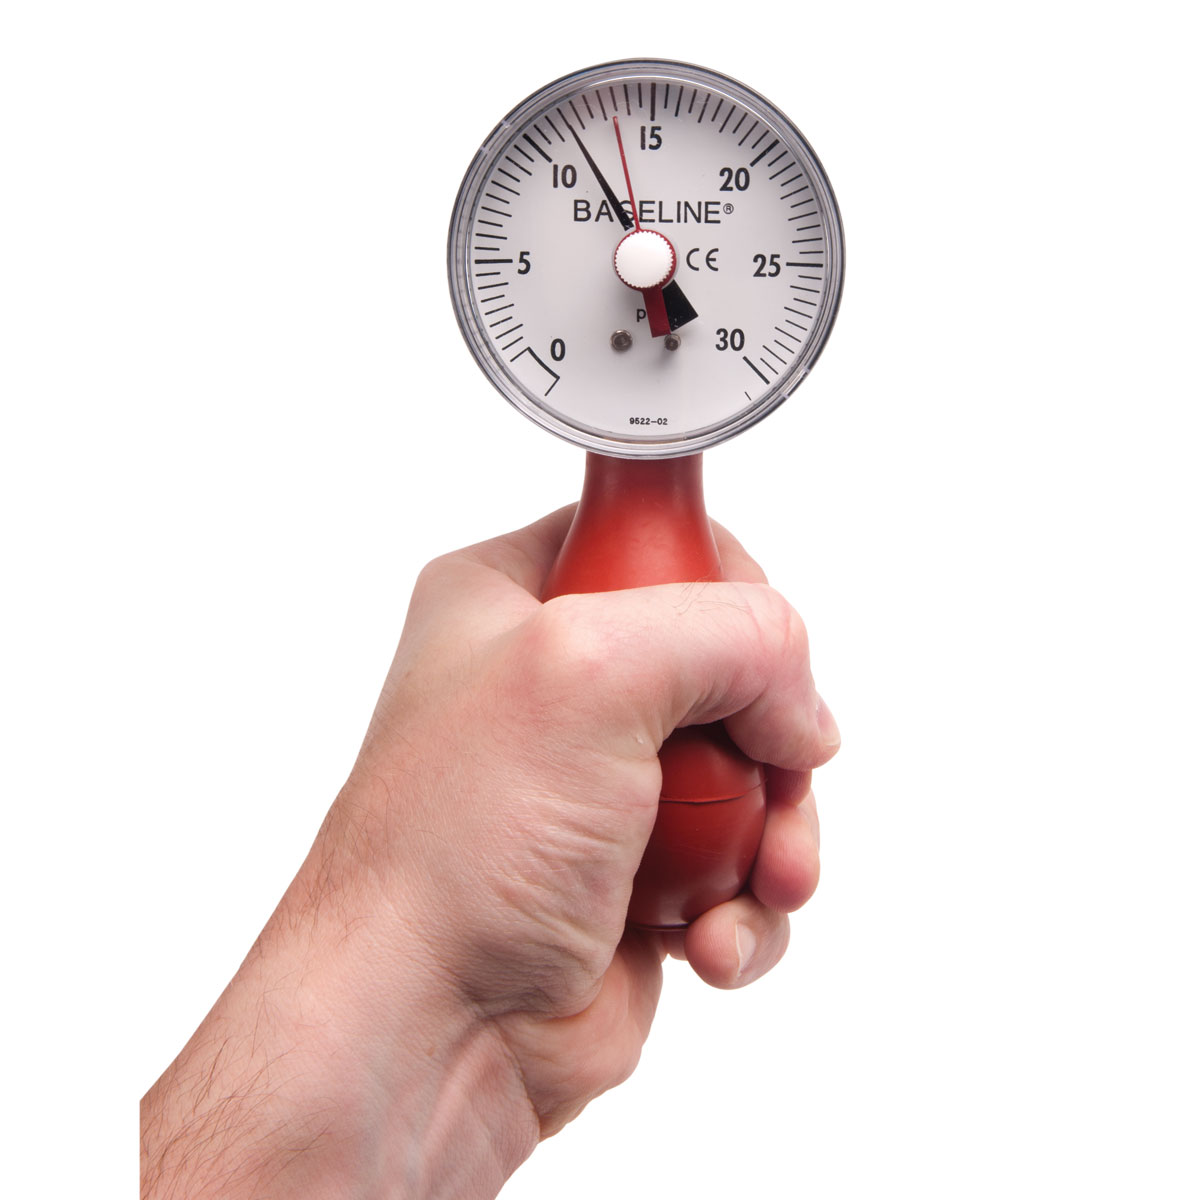 Baseline Pneumatic (squeeze bulb) Dynamometer | Hand ...